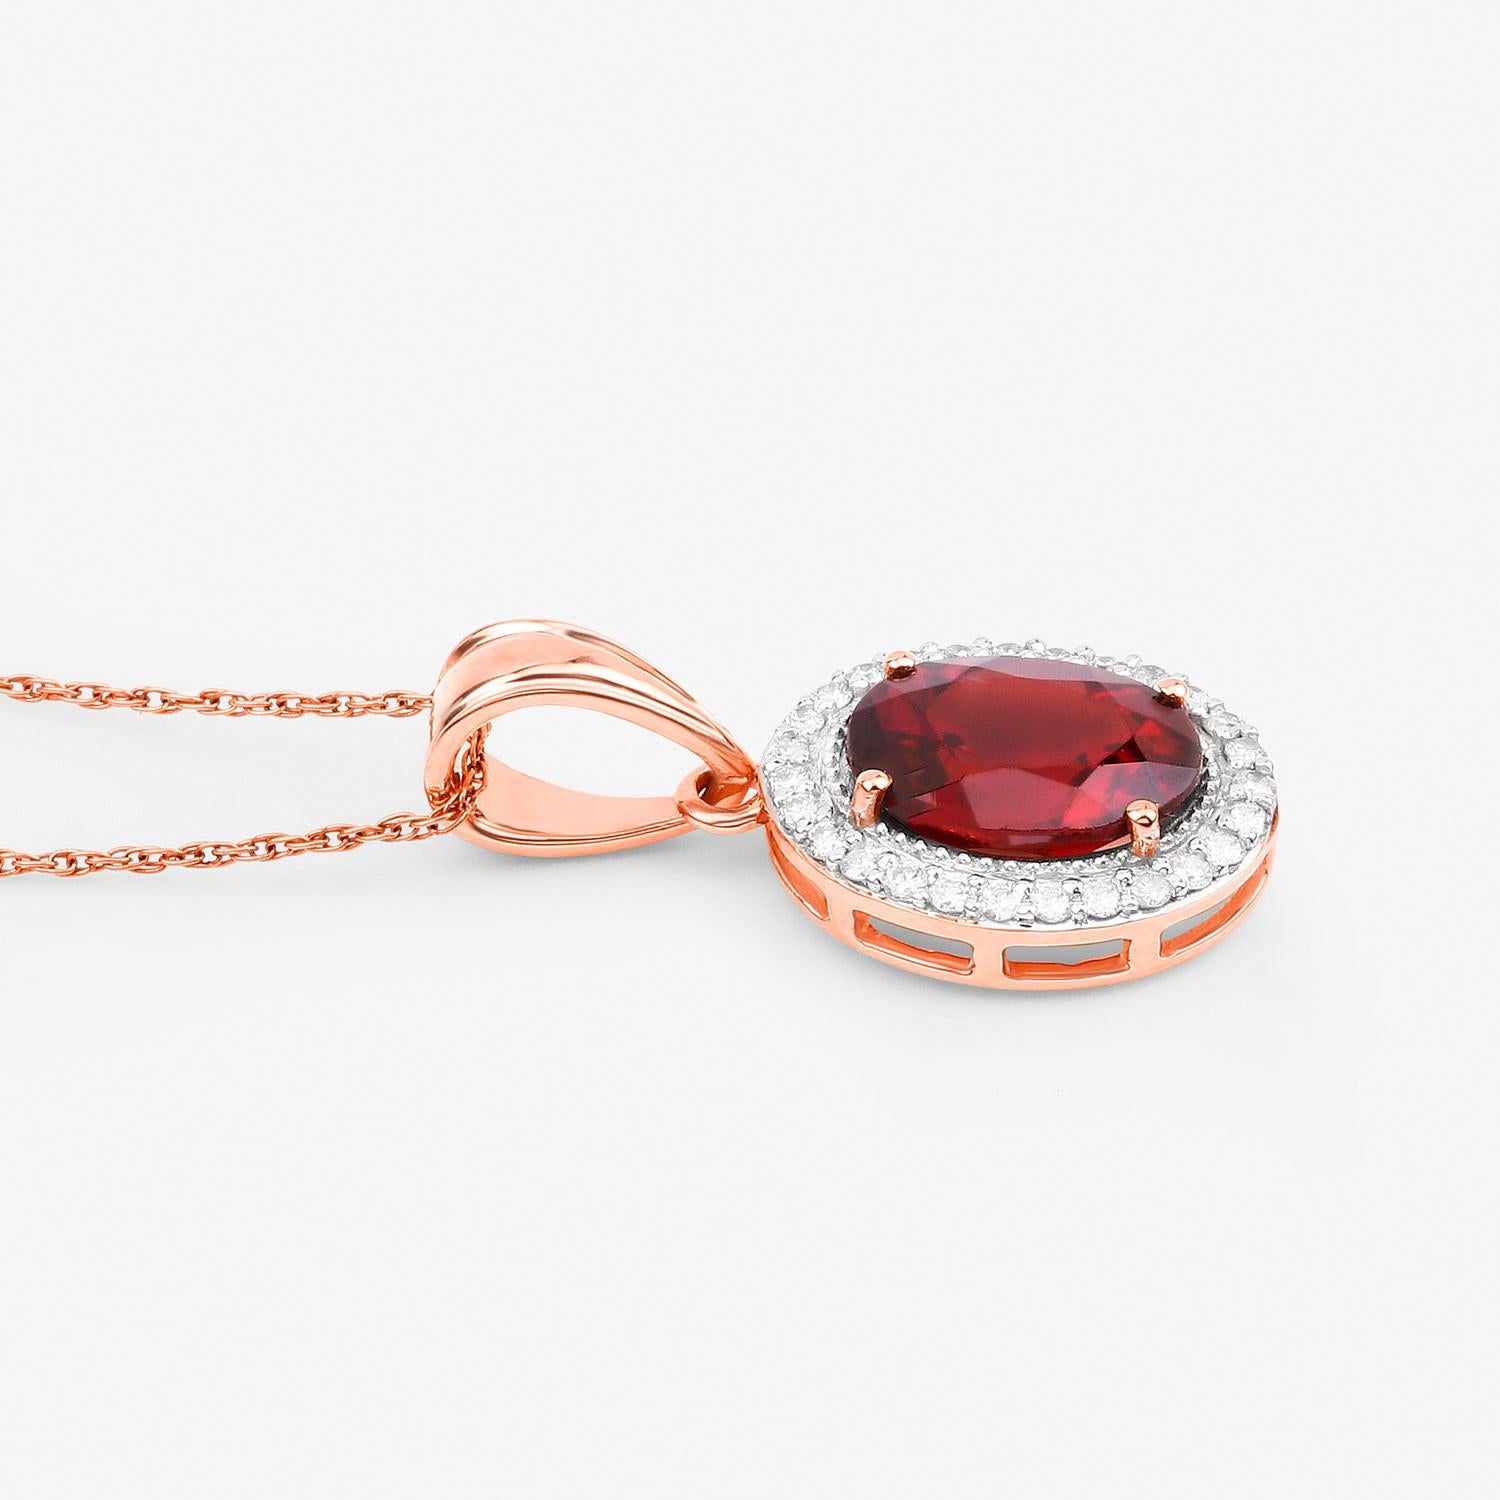 Rhodolite Garnet Necklace With Diamonds 2.95 Carats 14K Rose Gold In Excellent Condition For Sale In Laguna Niguel, CA